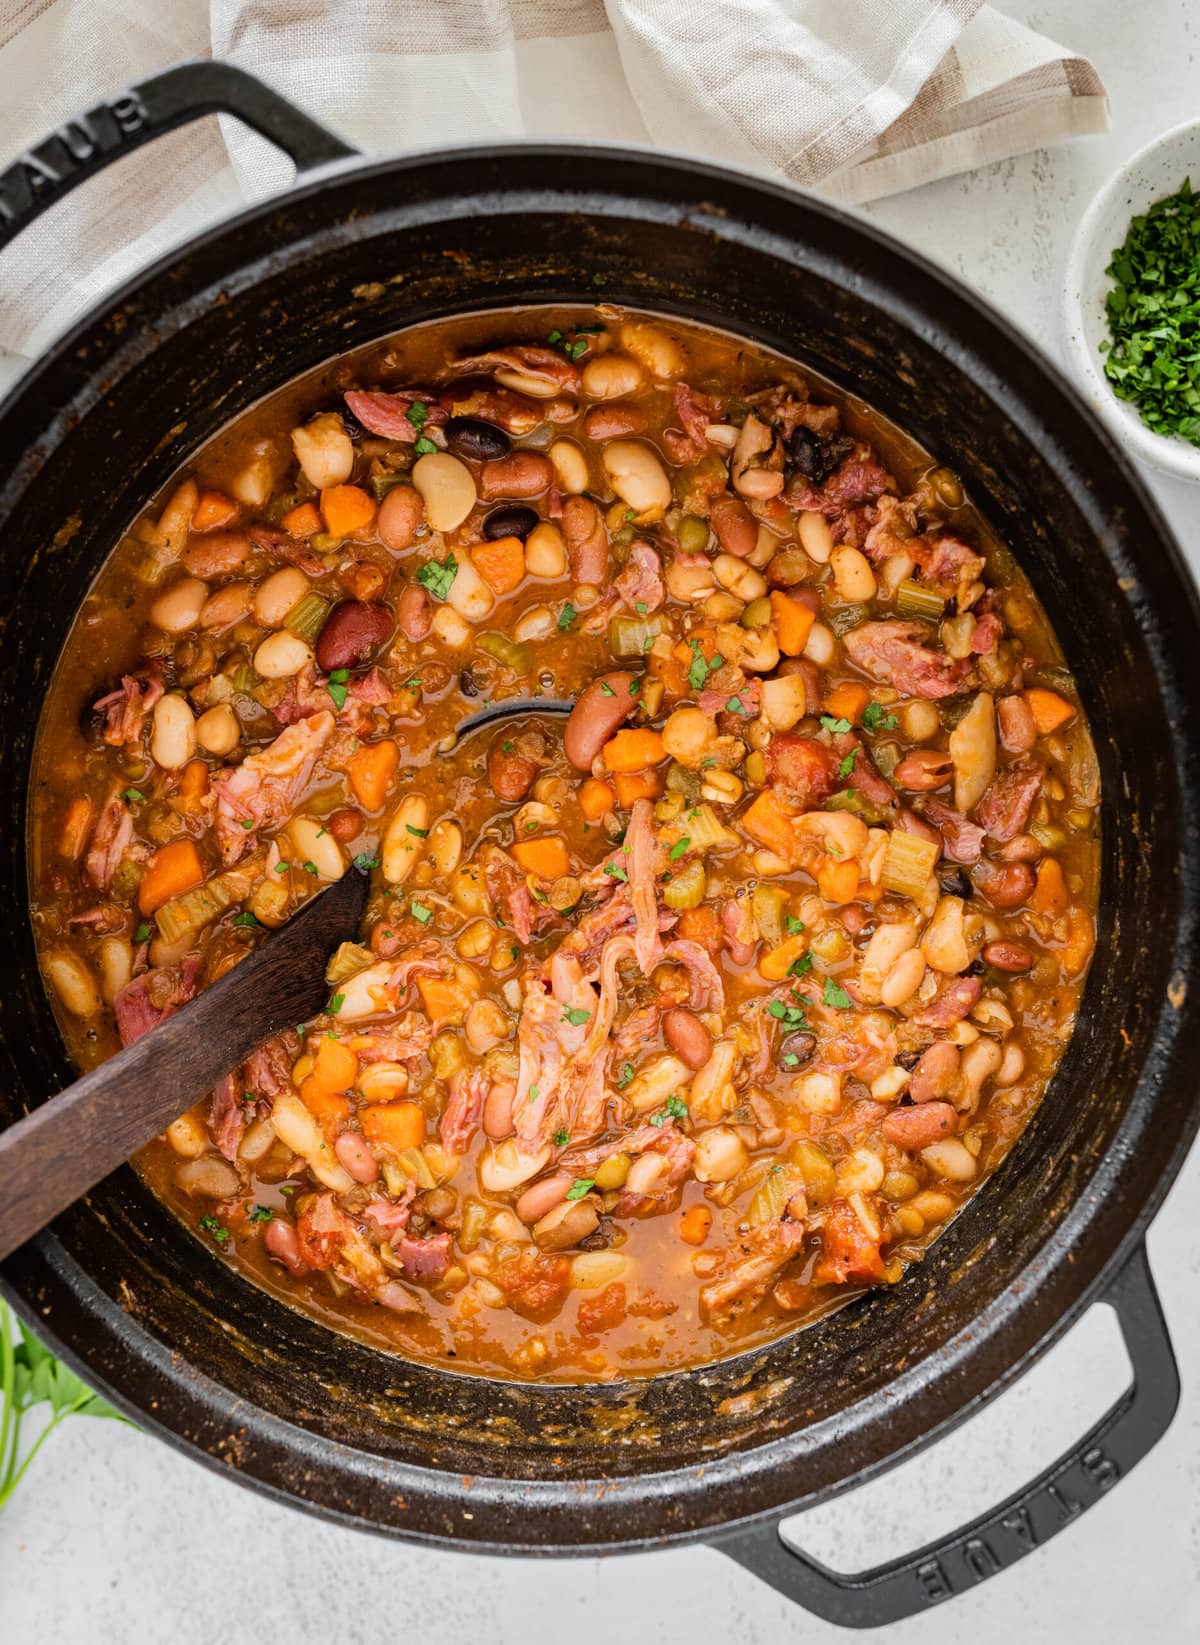 how to make 15 bean soup mix recipe with ham Step by Step: finished soup after it is cooked.